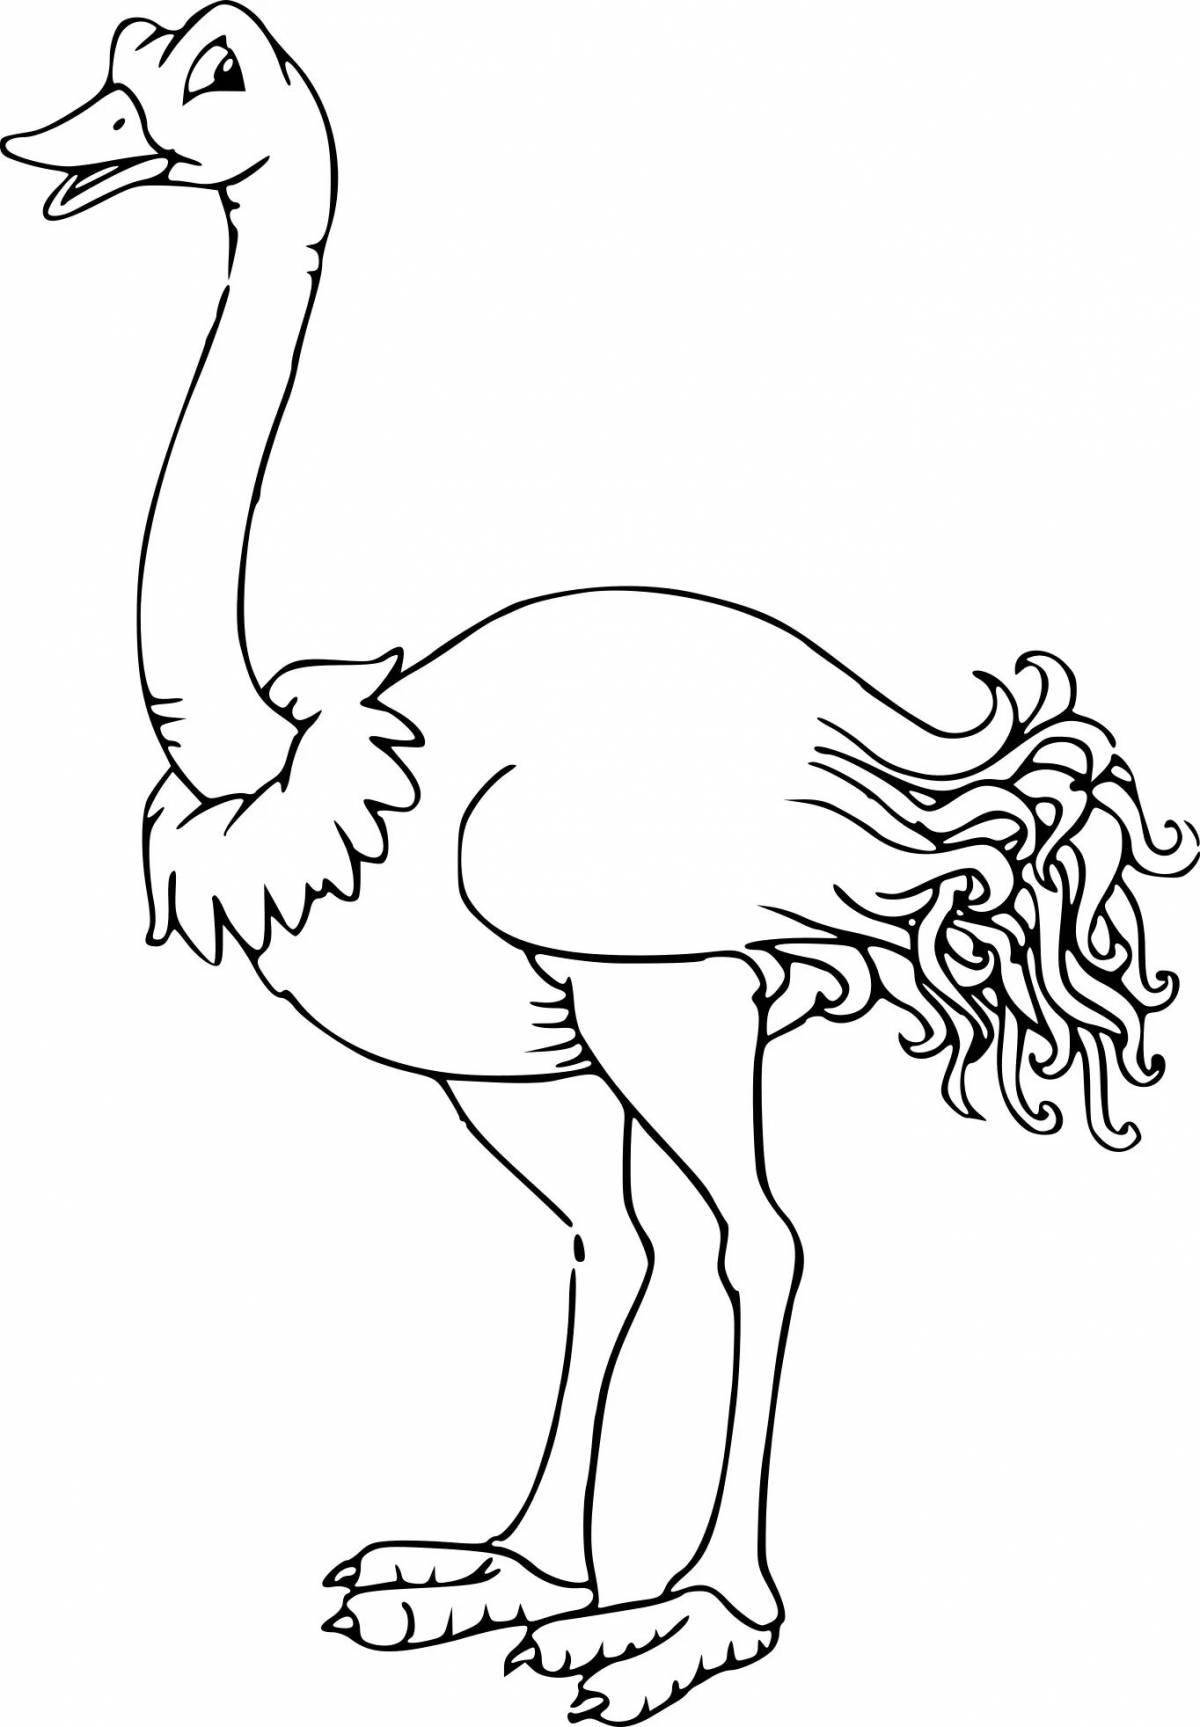 Awesome ostrich coloring book for kids